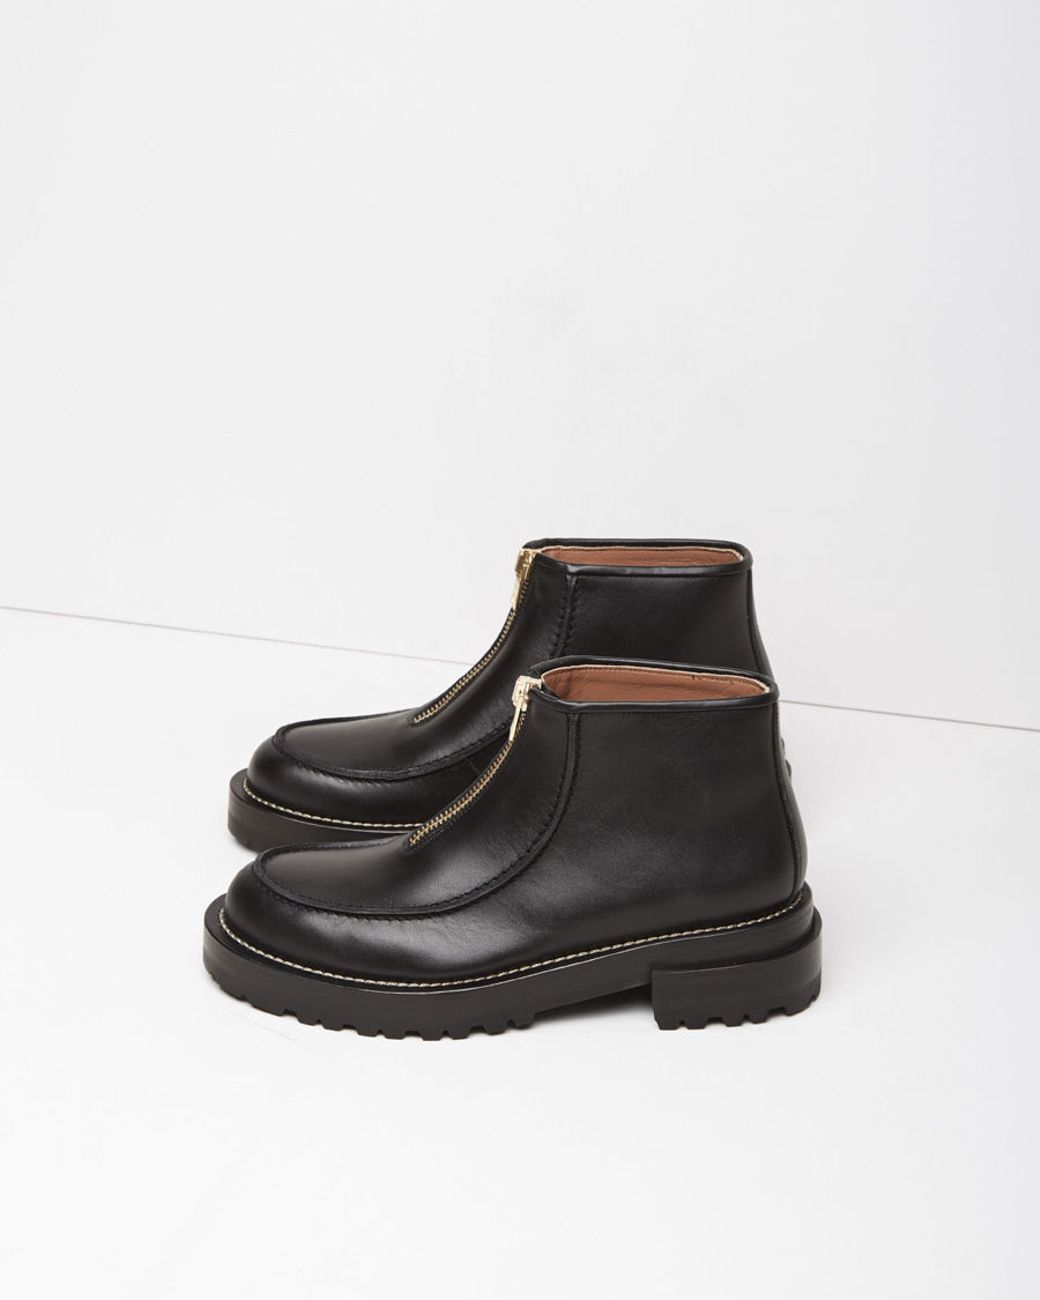 Marni Zip-Front Leather Ankle Boots in Black | Lyst